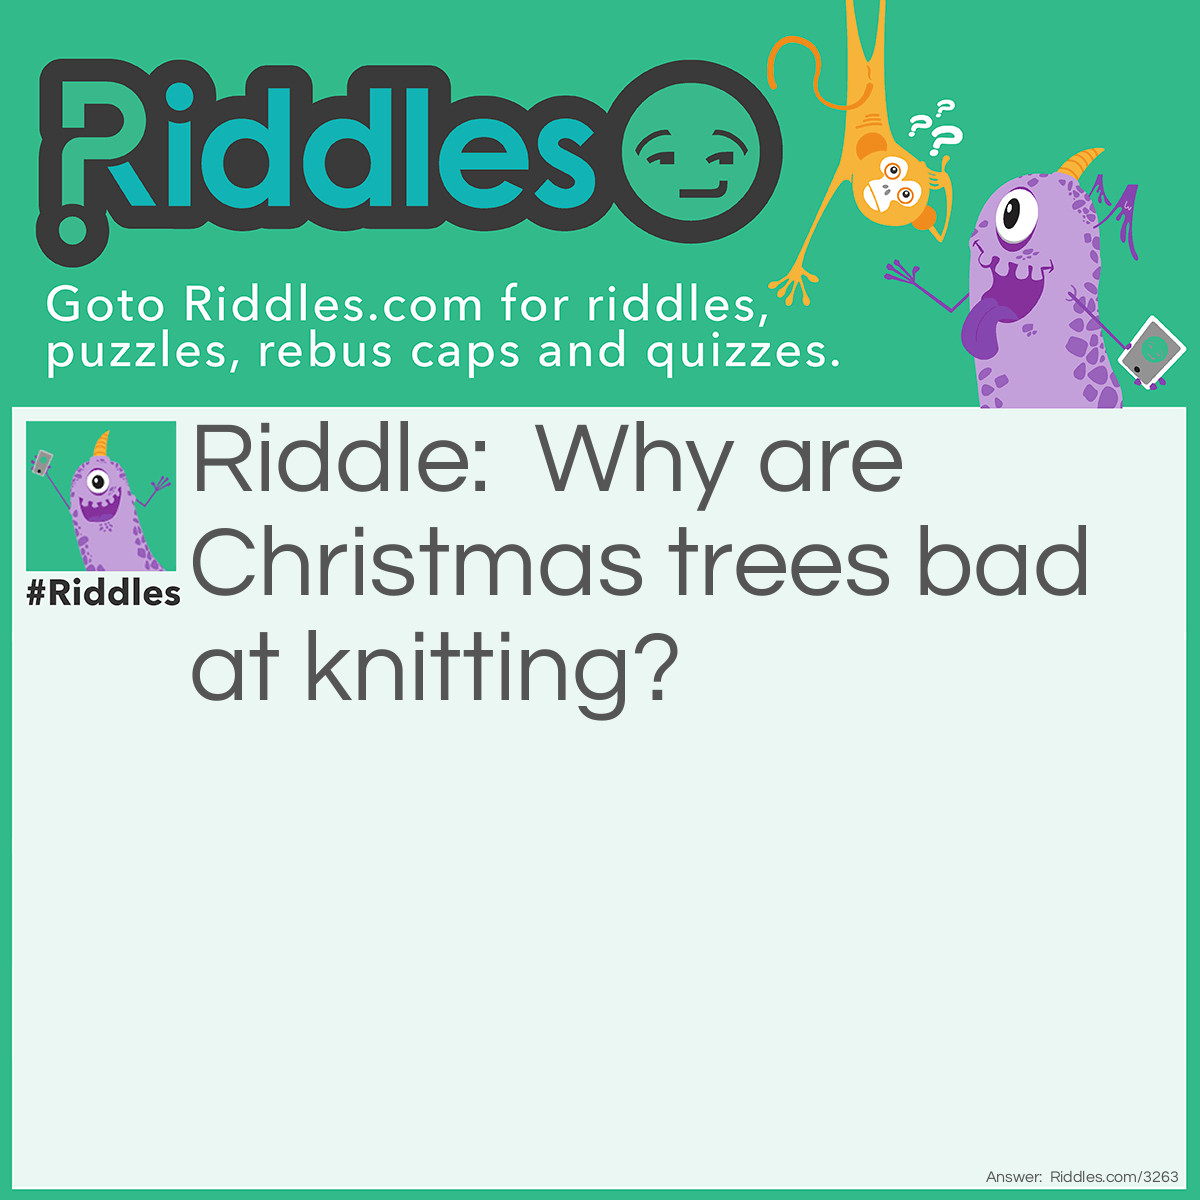 Riddle: Why are Christmas trees bad at knitting? Answer: Because they always drop their needles.